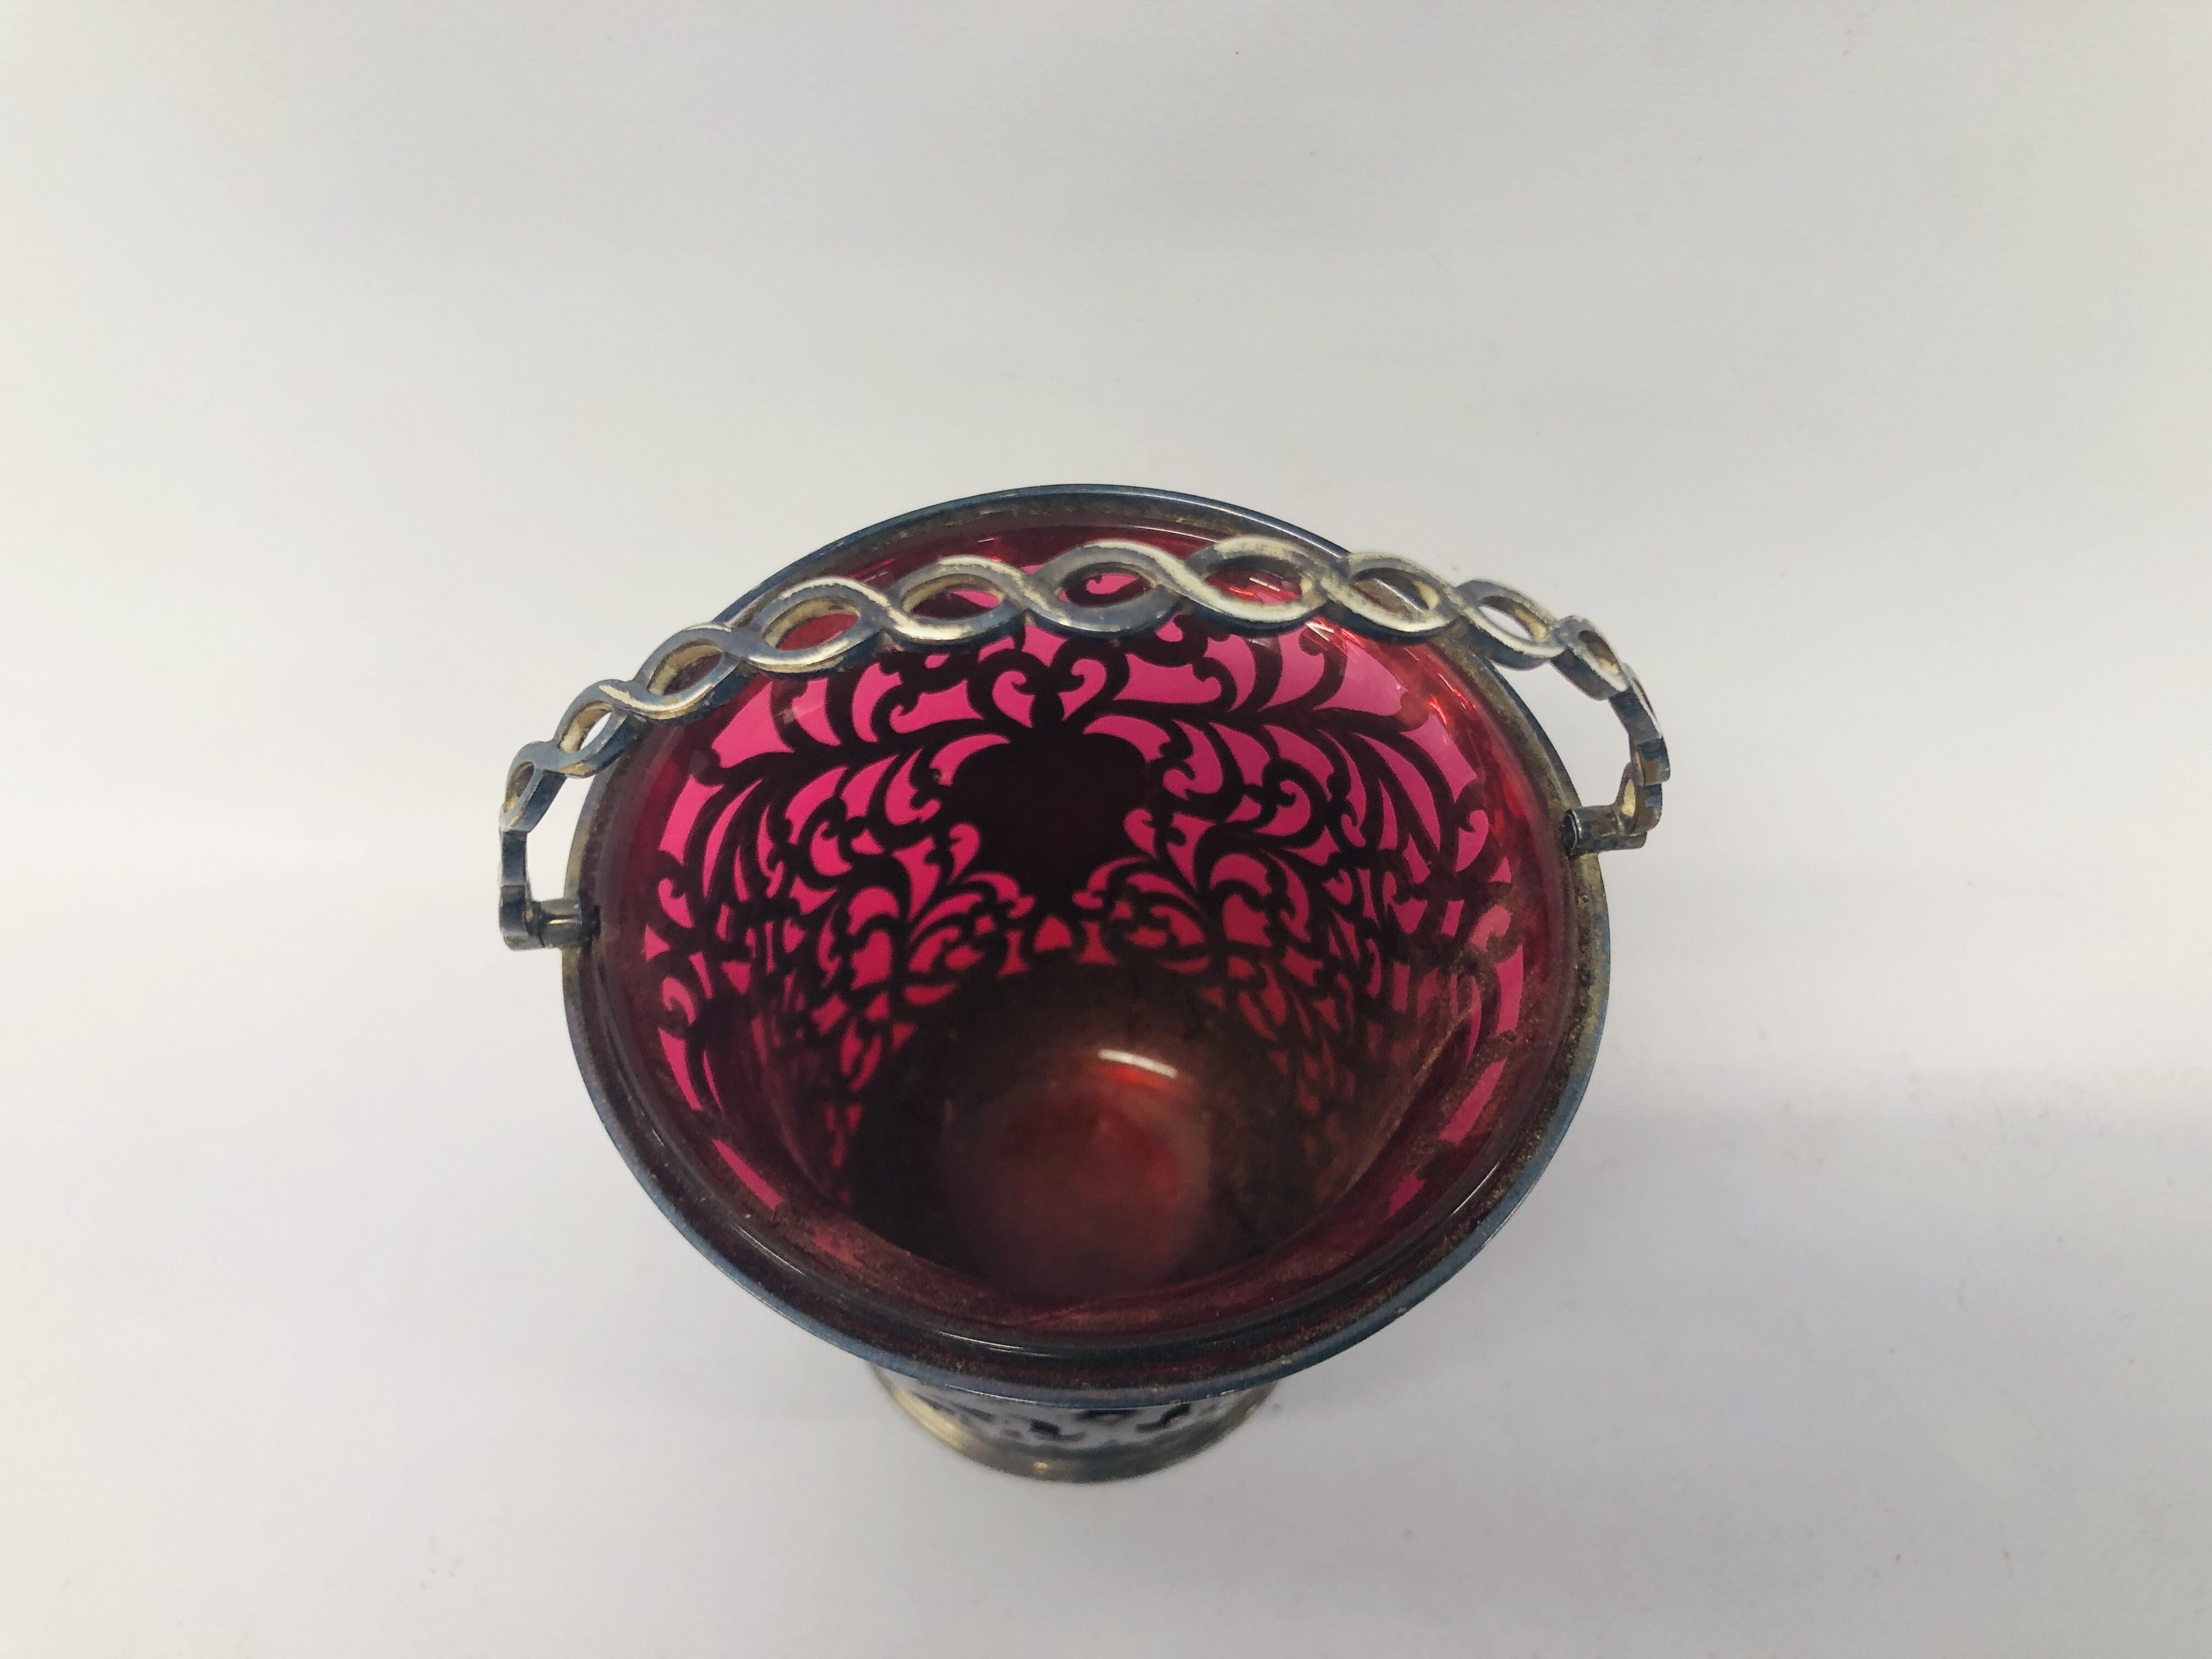 PERIOD SILVER OPEN WORK BASKET WITH CRANBERRY GLASS LINER H 11CM (NOT INCLUDING HANDLE) - Image 4 of 6